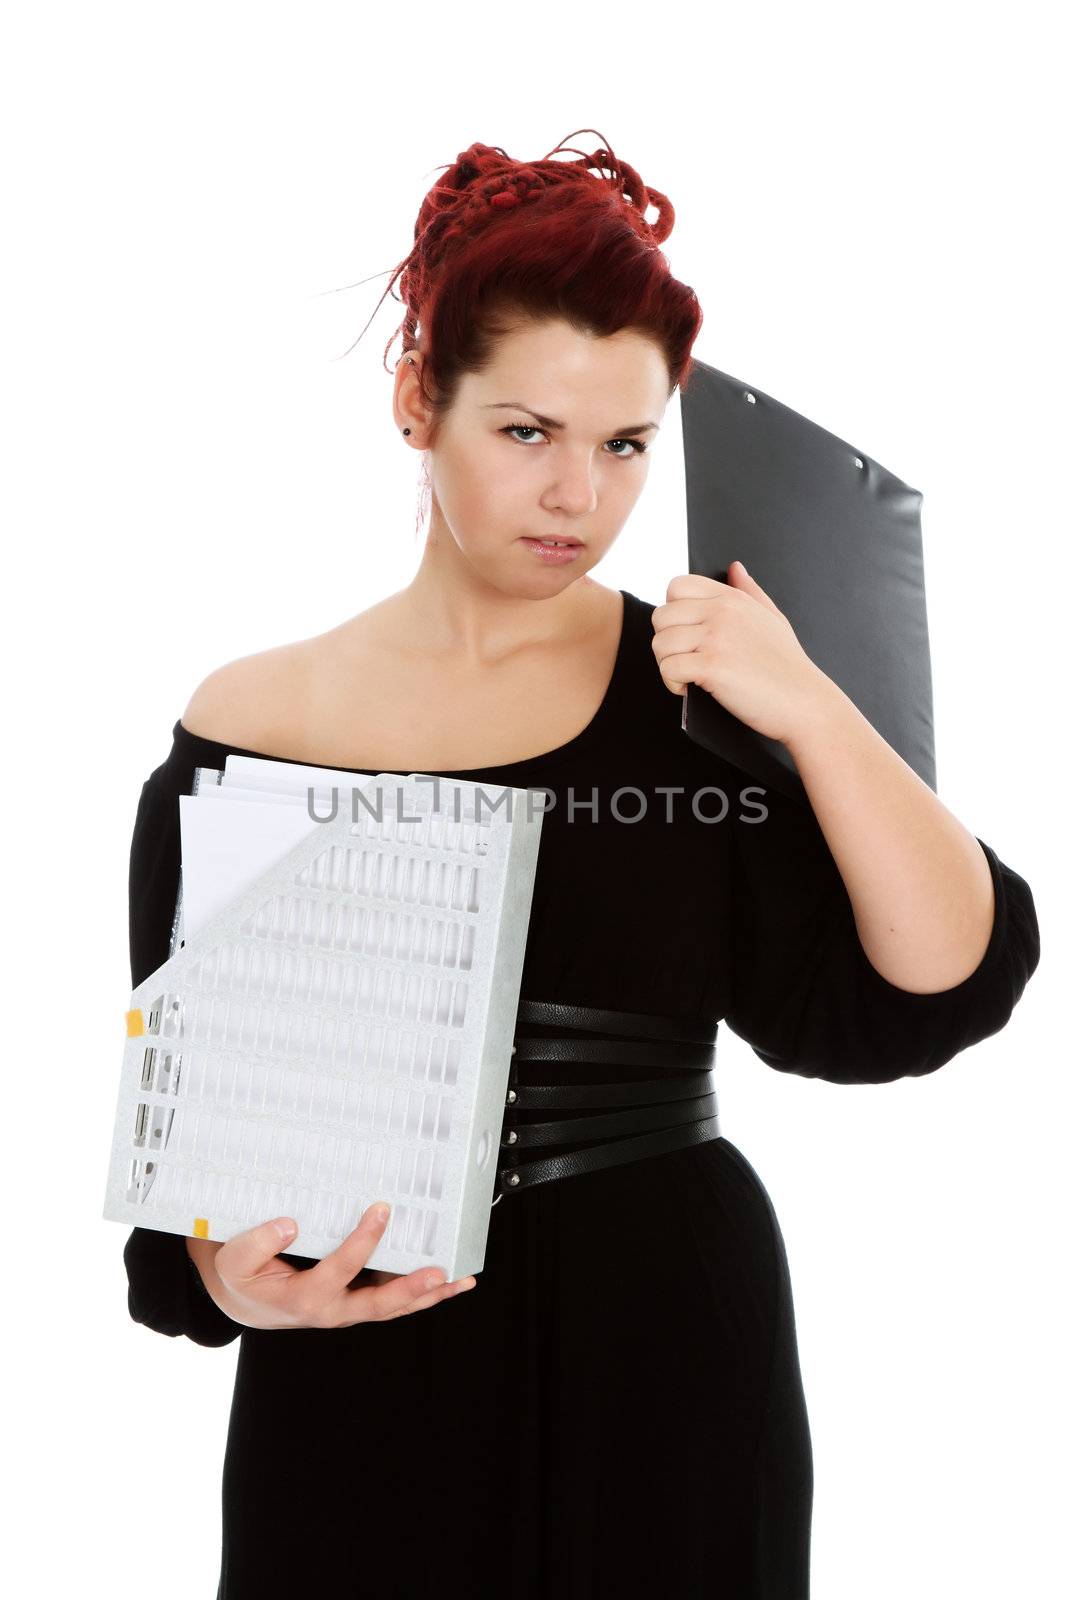 Modern red-haired accountant with folder of documents isolated on white background 